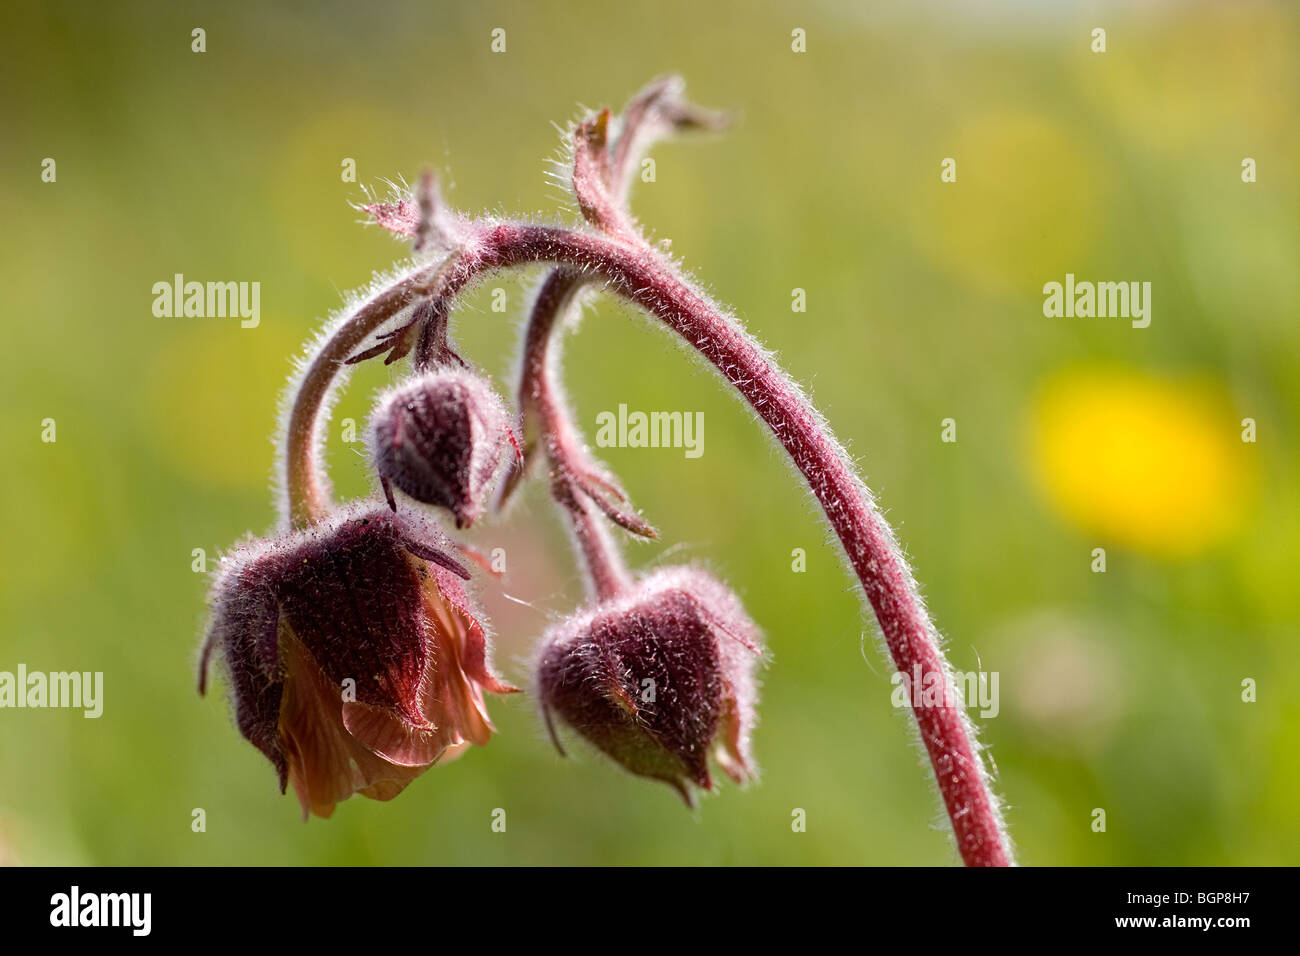 Water avens, close-up, Sweden. Stock Photo